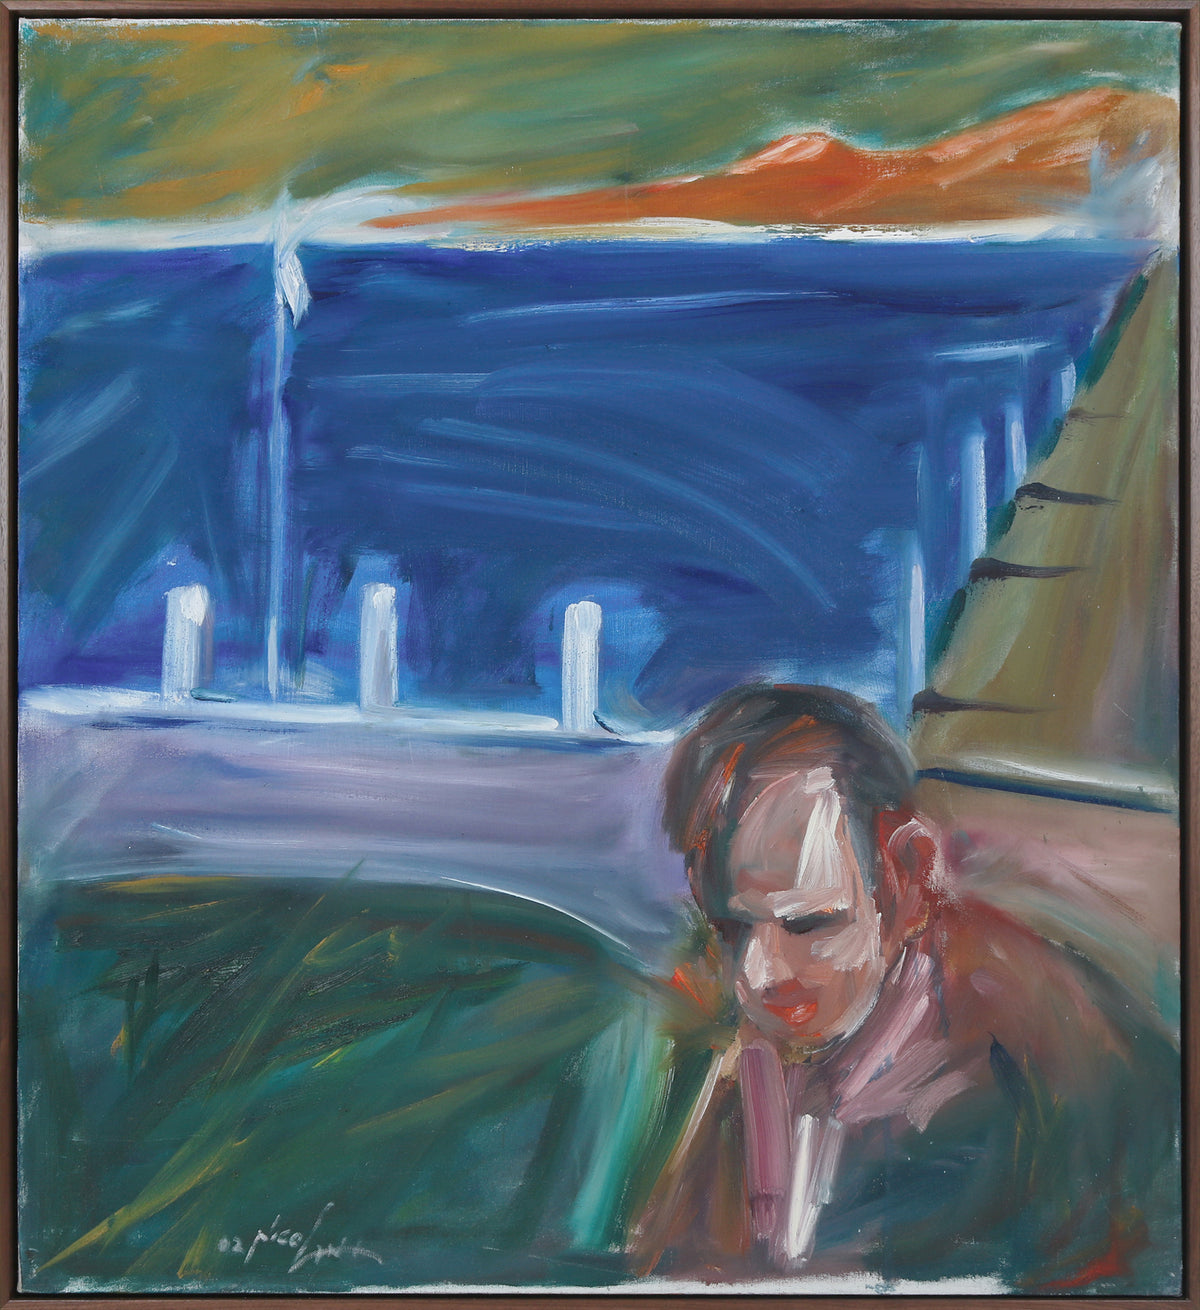 Abstracted Figure by the Bay &lt;br&gt;2002 Oil &lt;br&gt;&lt;br&gt;#B3727